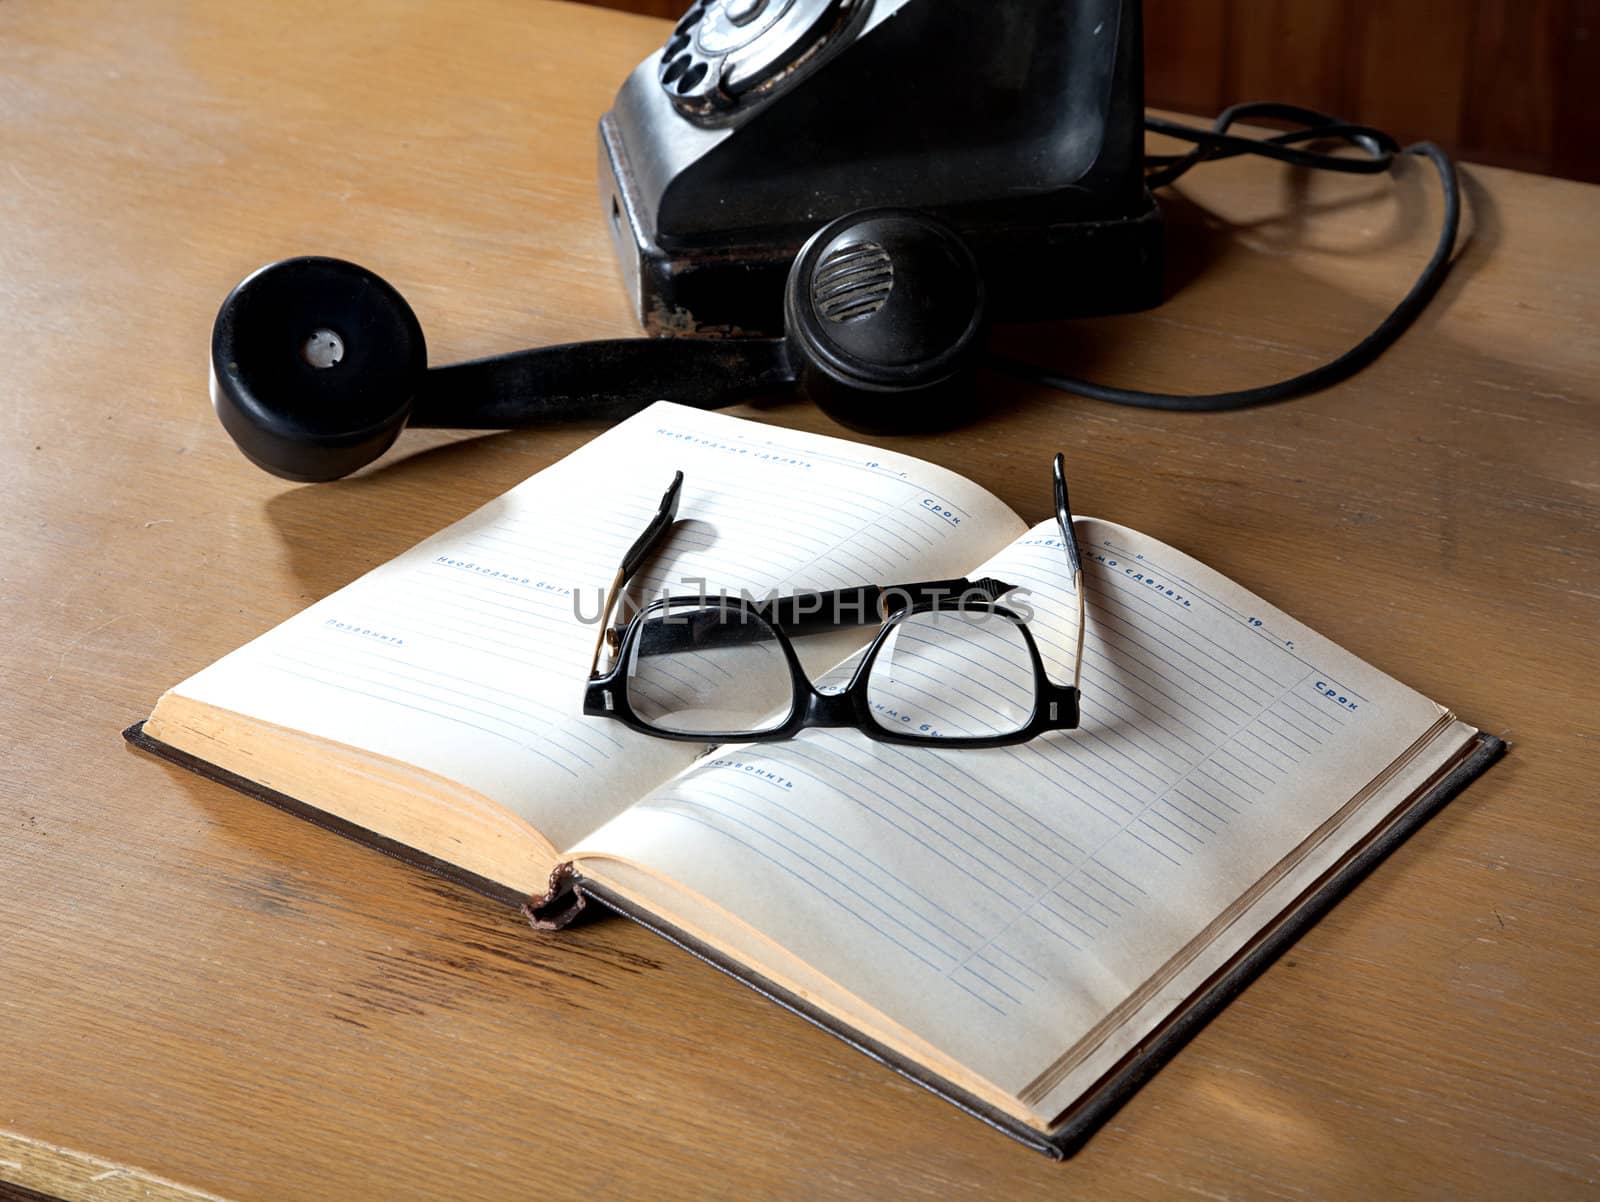 The old daily log with glasses and phone on a table